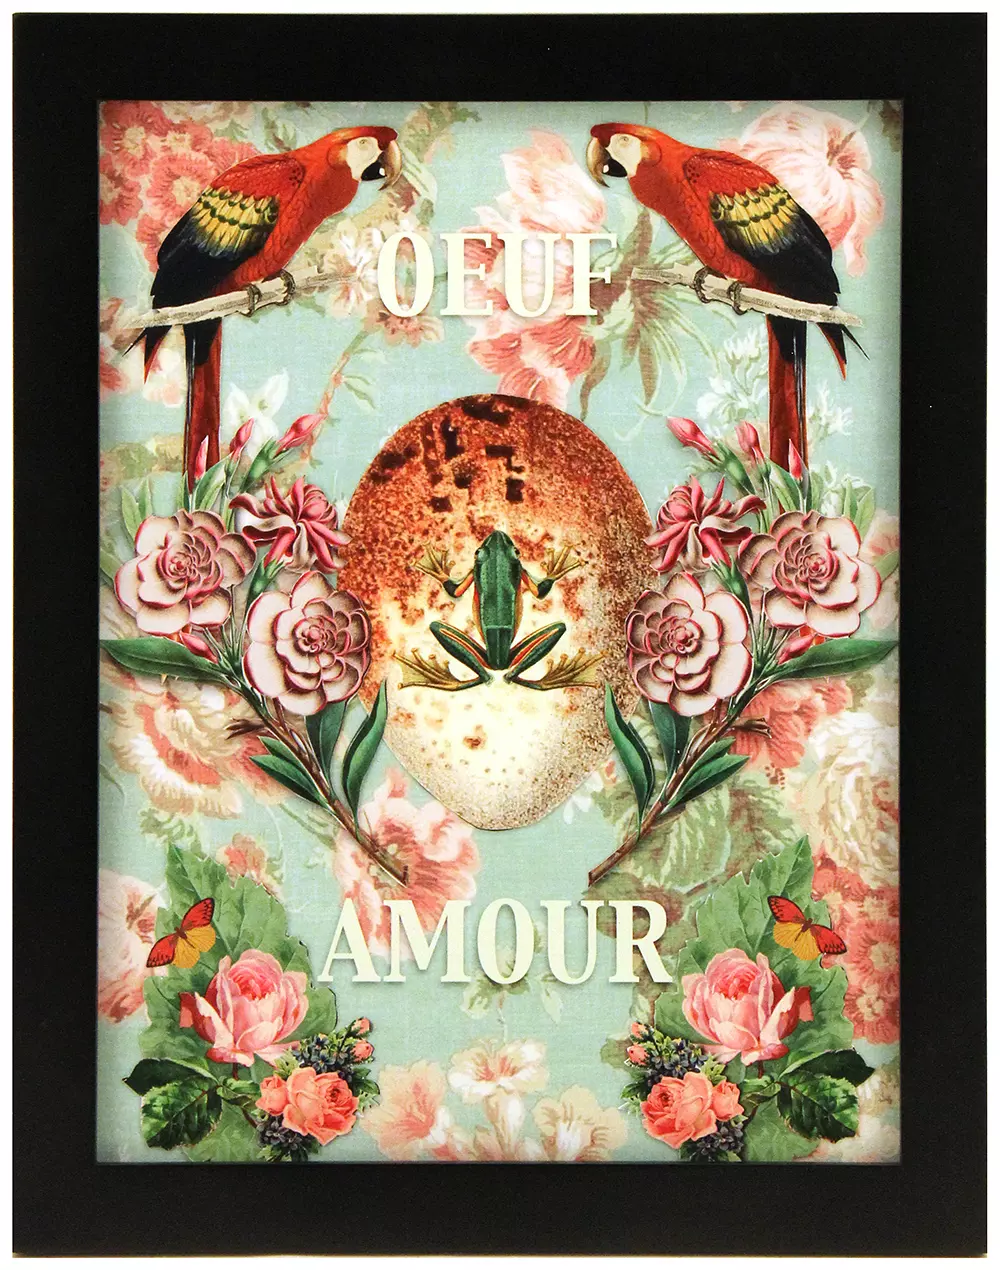 Oeuf Amour #3, Bedelgeuse